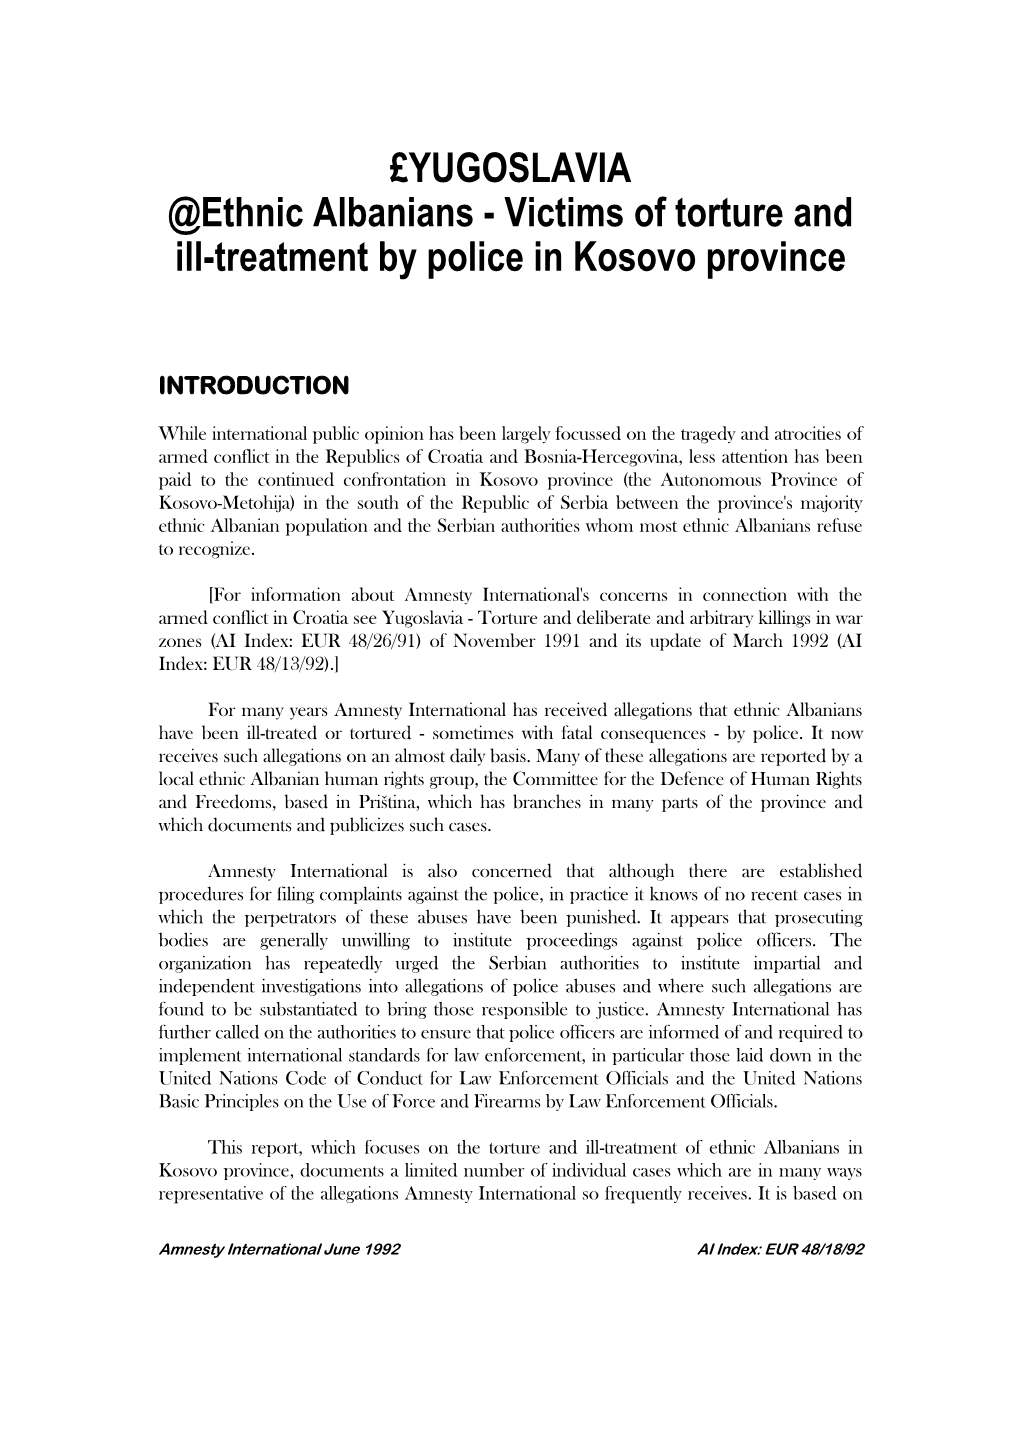 YUGOSLAVIA @Ethnic Albanians - Victims of Torture and Ill-Treatment by Police in Kosovo Province